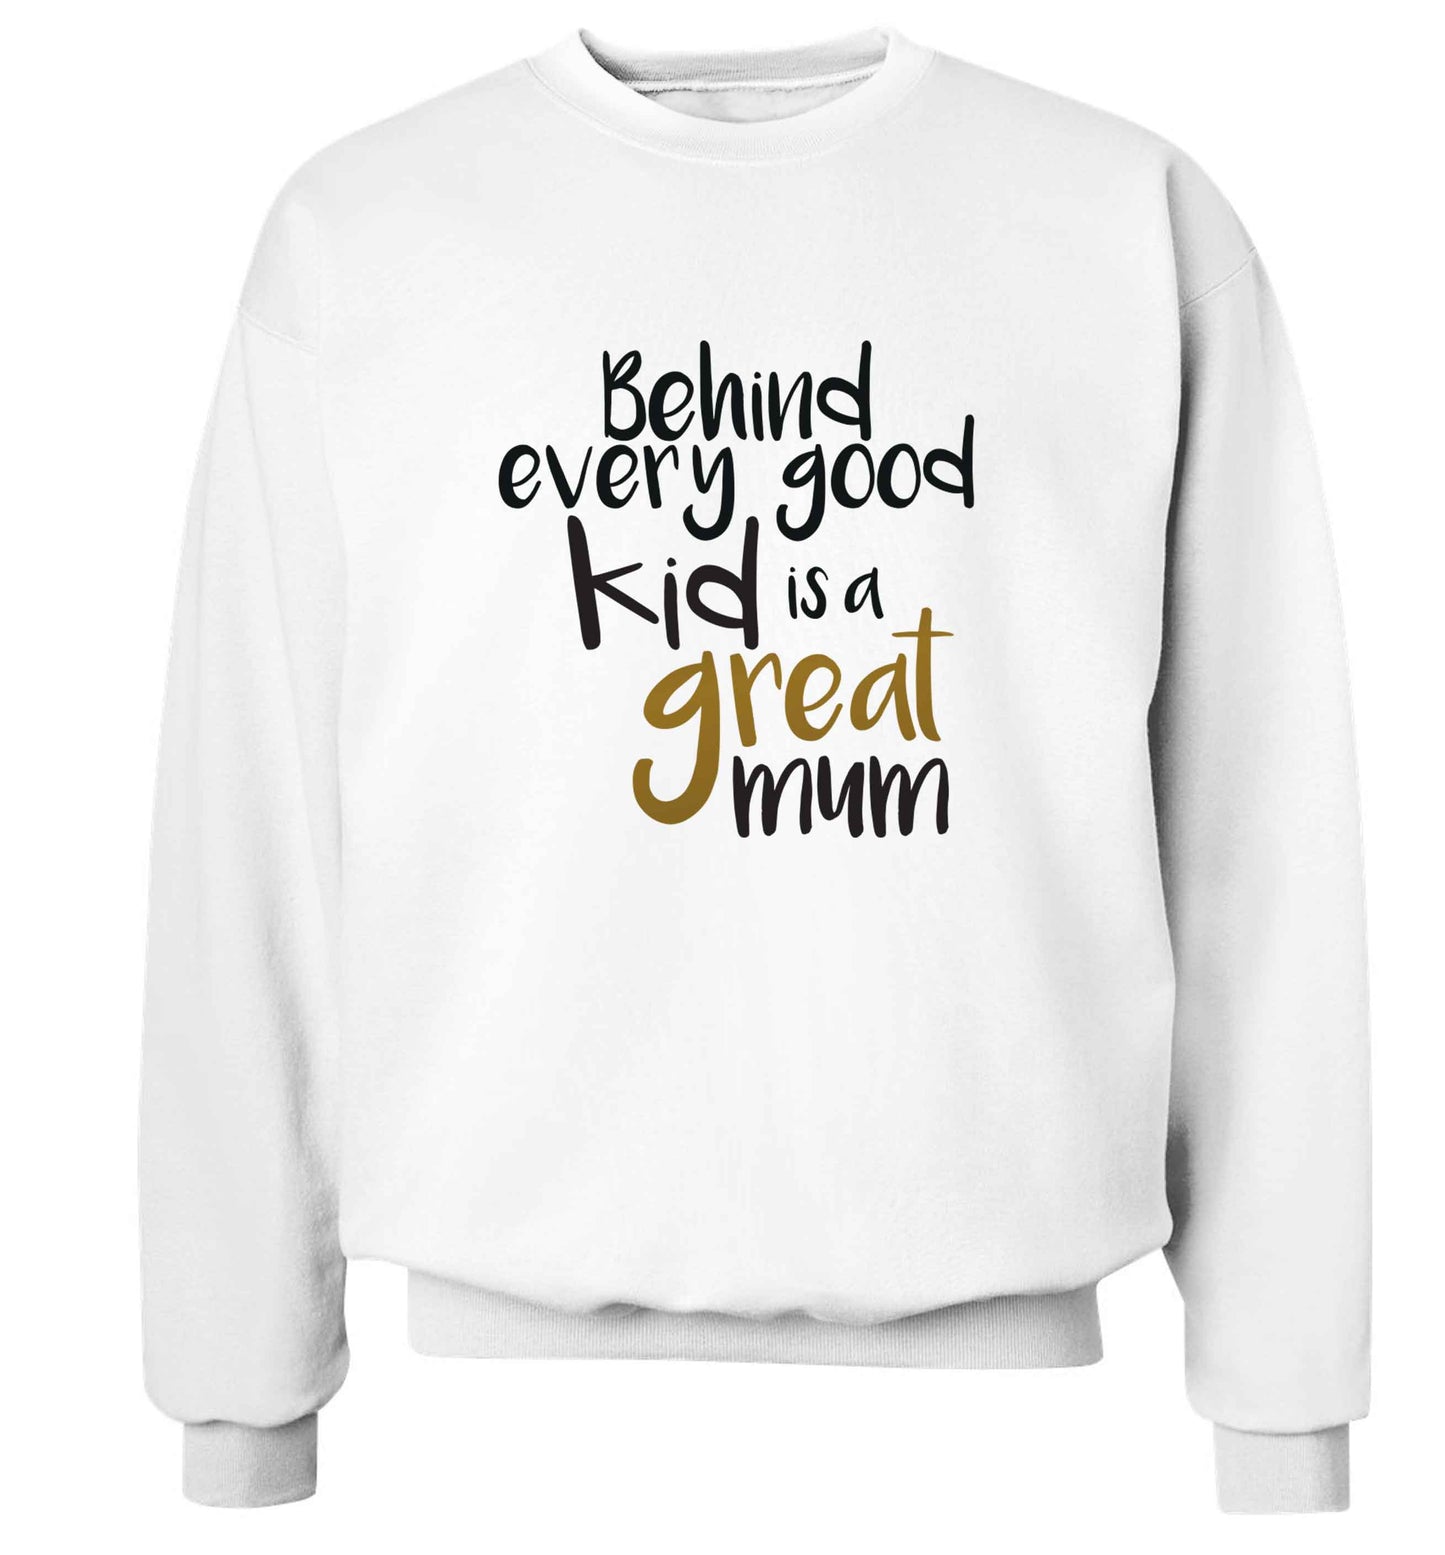 Behind every good kid is a great mum adult's unisex white sweater 2XL